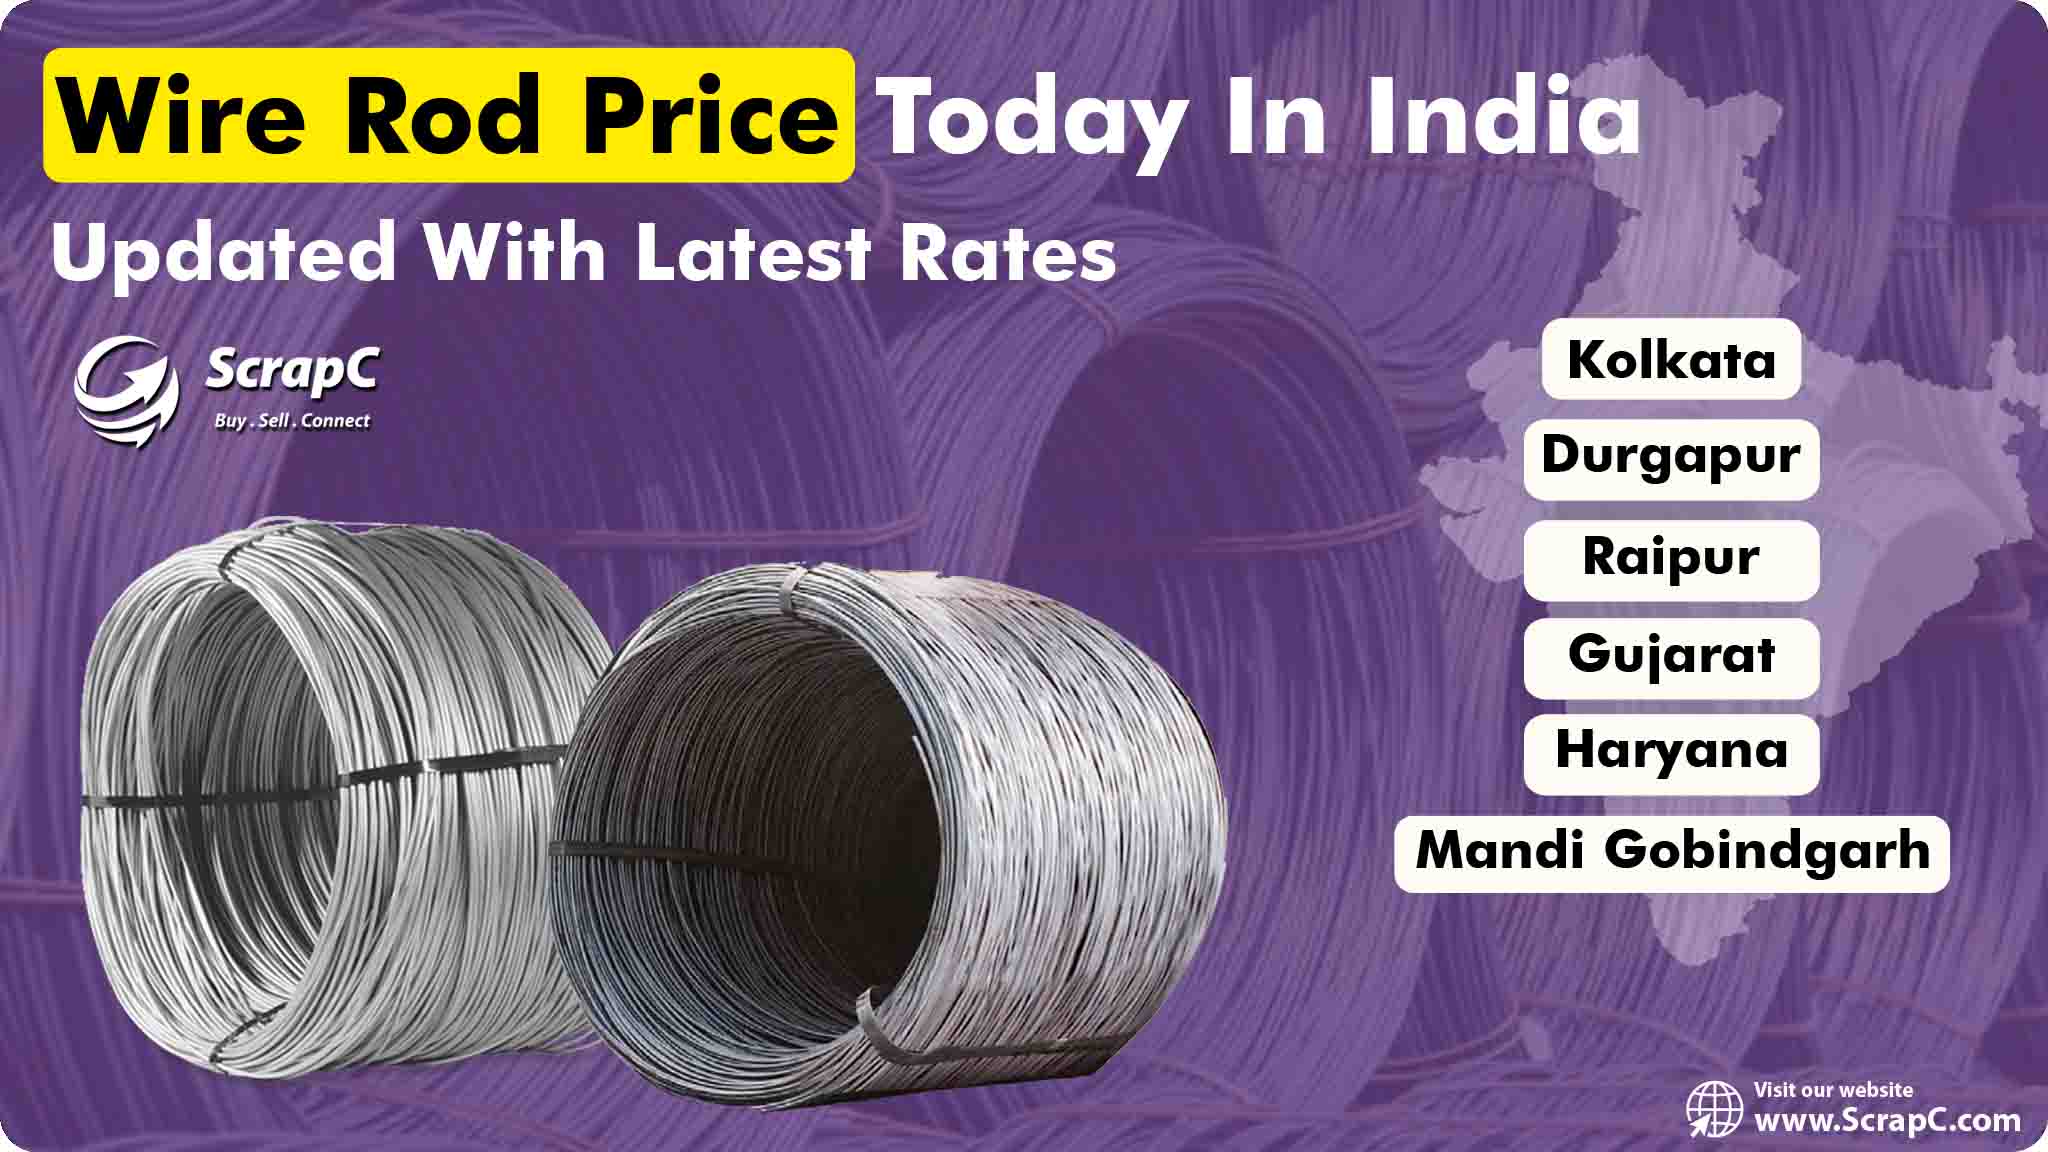 Wire Rod Price Today